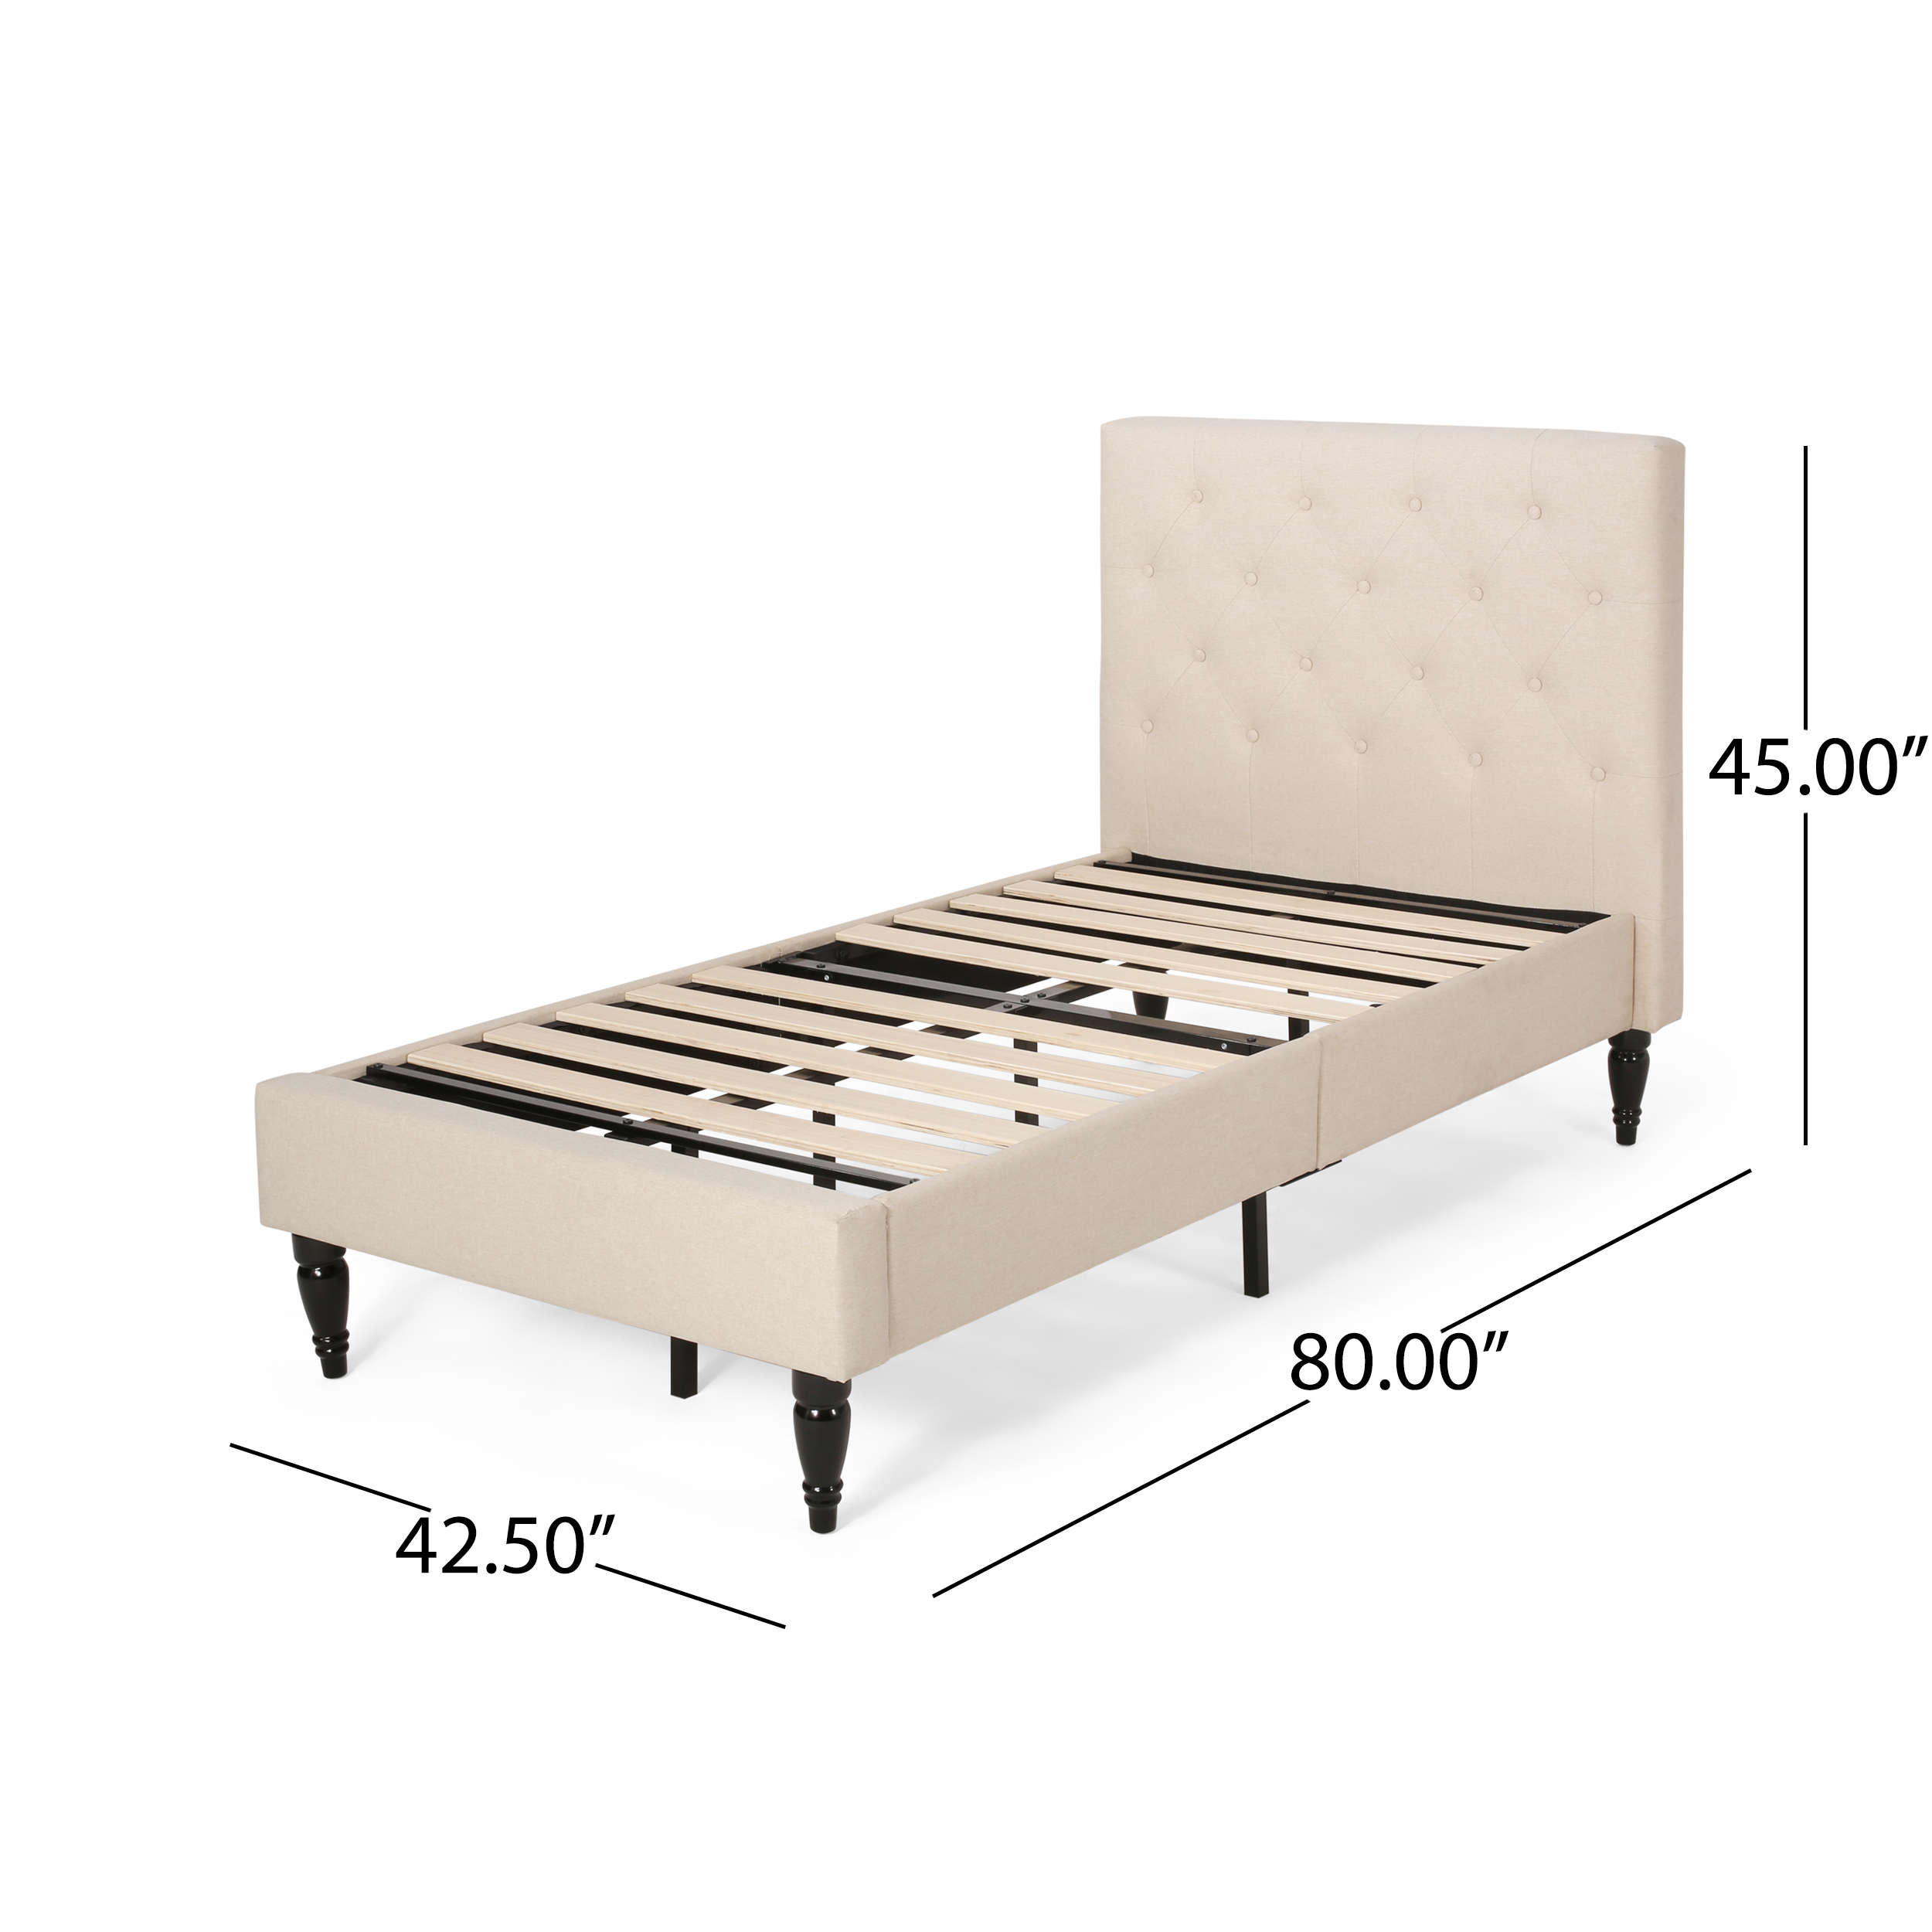 Lera Contemporary Upholstered Twin Bed Platform, Beige and Black - image 5 of 13